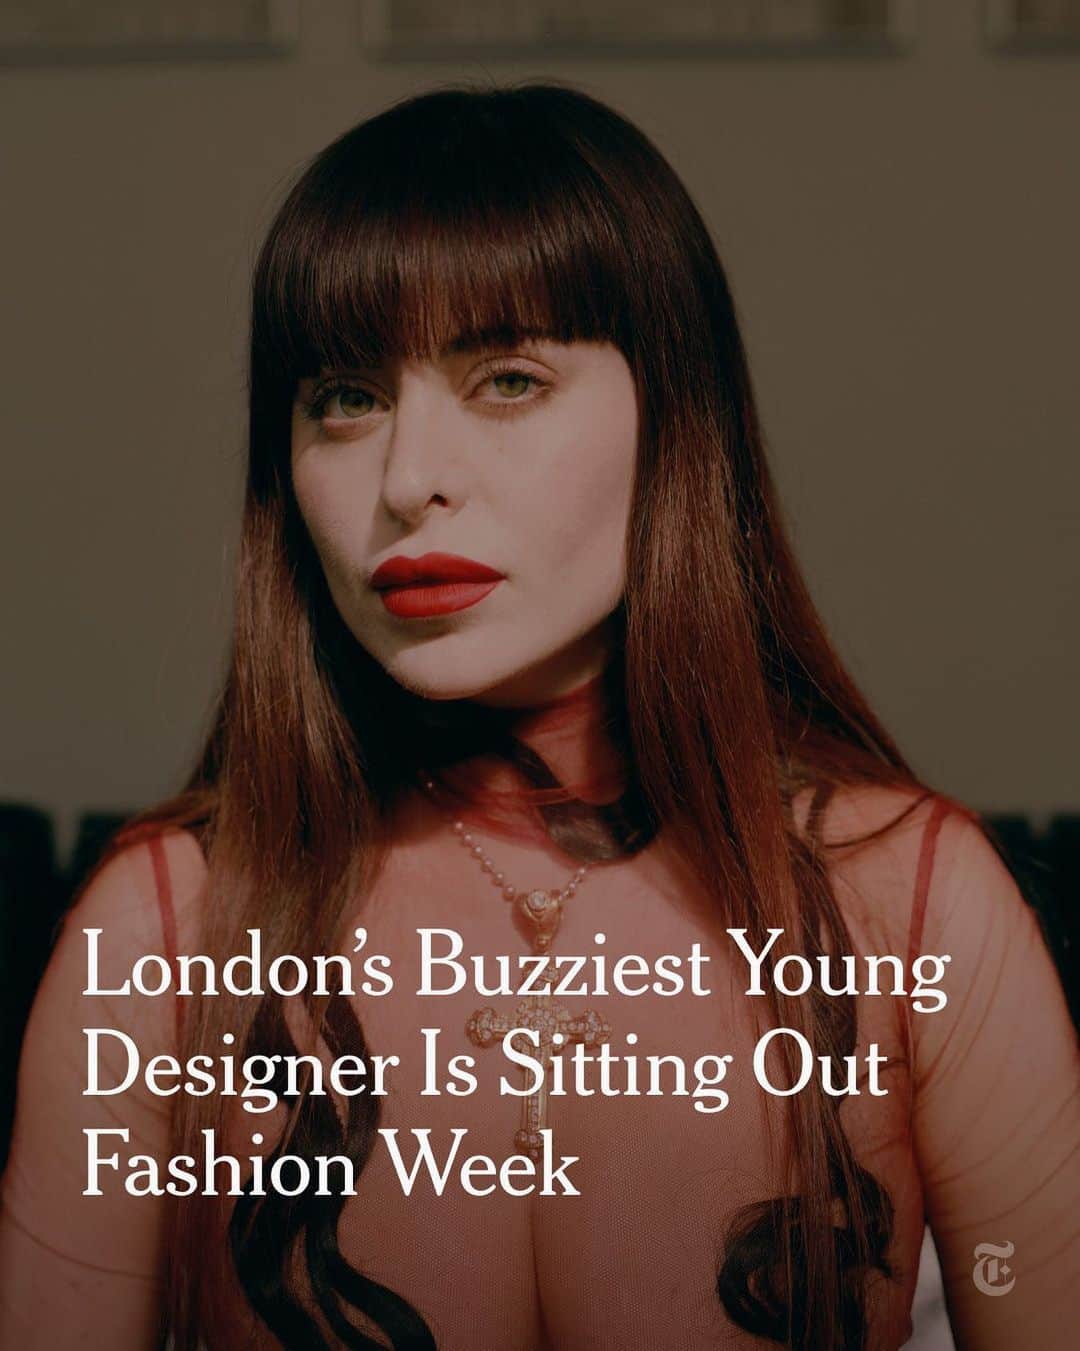 New York Times Fashionのインスタグラム：「Dilara Findikoglu had the kind of summer most emerging designers could only dream of. She dressed Margot Robbie in a racy, strapless dress for the “Barbie” premiere after-party in London, one of the most high-profile red carpets of the year. At the MTV Video Music Awards, Cardi B wore a custom gown and matching cuffs made from thousands of silver hair clips designed by Findikoglu.  In an interview with The New York Times, she said she was sitting out London Fashion Week, though not because of the anarchic streak for which she is known. Findikoglu had to cancel her planned show if she wanted to keep her business afloat.  “This wasn’t something I wanted to do or a decision I took lightly, but the reality is we simply don’t have the finances for a runway show right now,” she said.  Tap the link in our bio to read more from @elizabethcpaton about @dilarafindikoglu’s difficult decision to cancel her runway at London Fashion Week. Photo by @toriferenc」